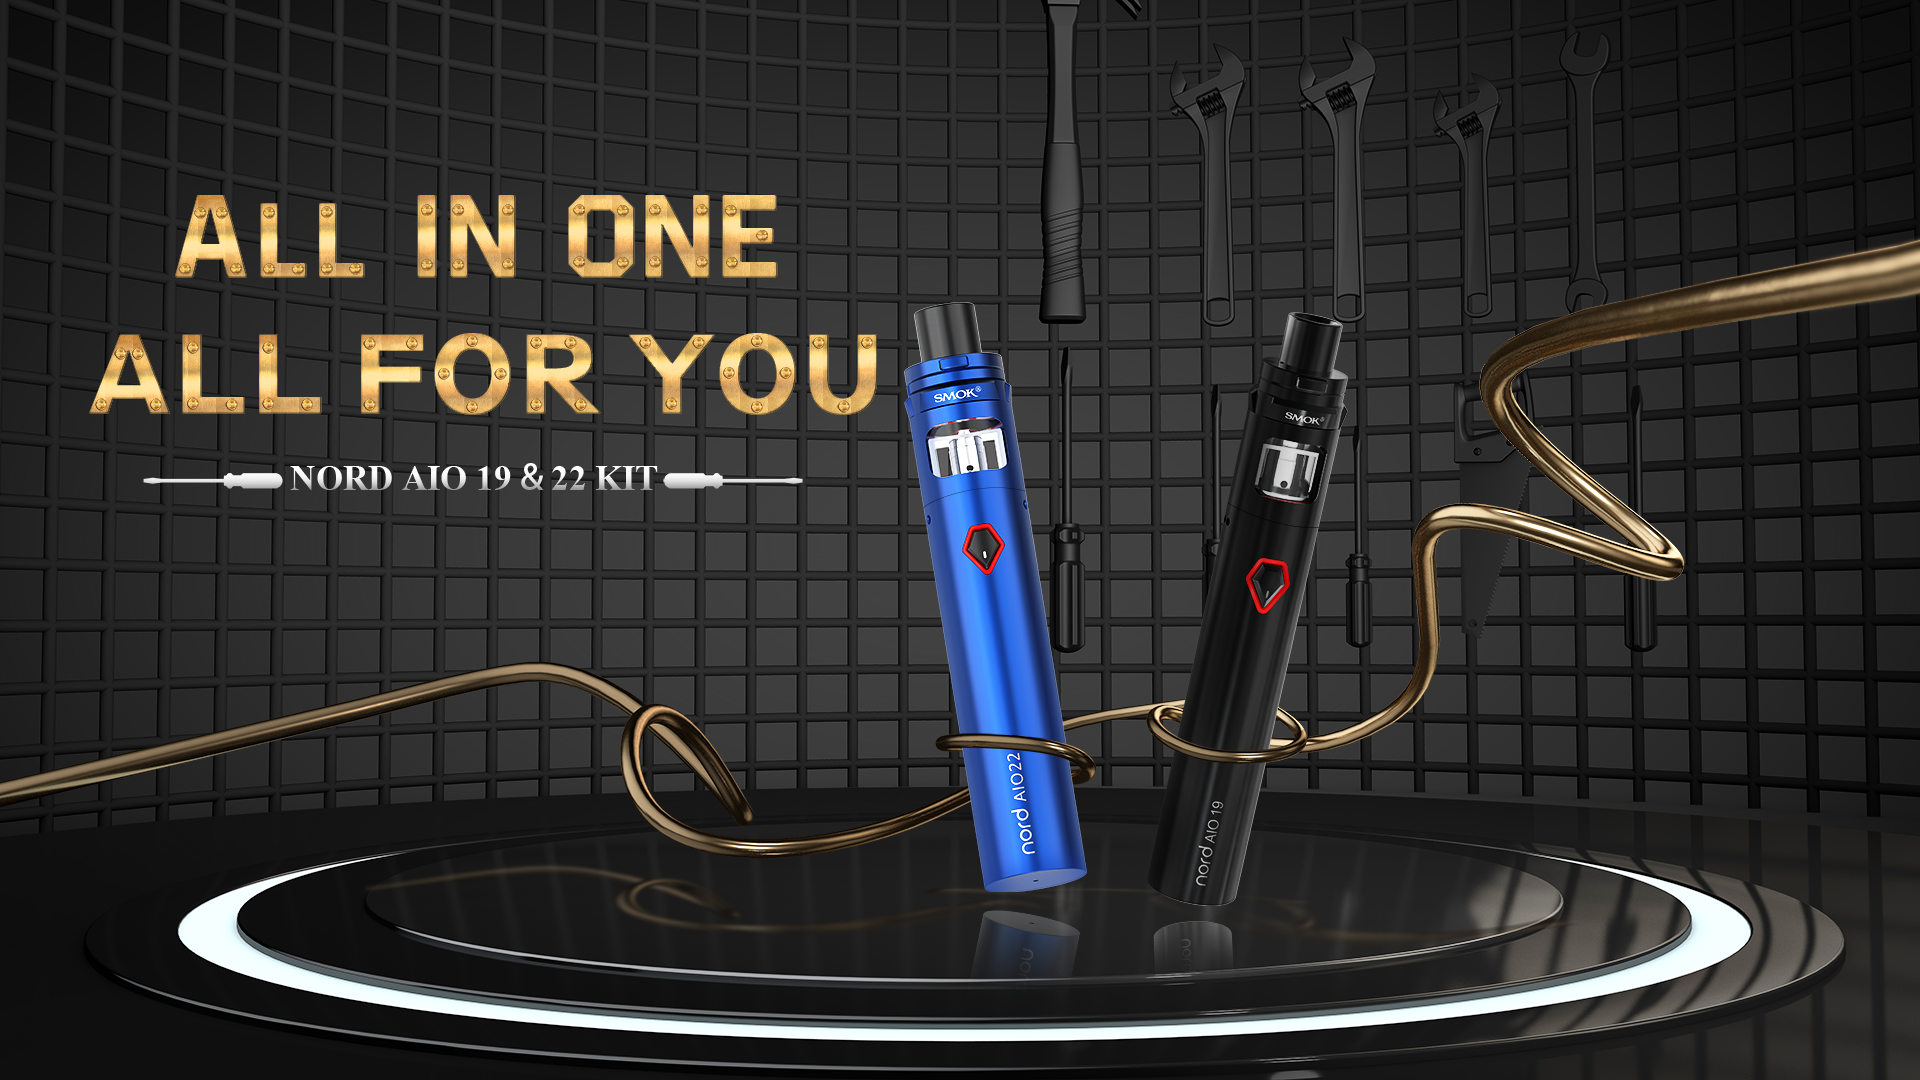 SMOK Nord AIO 19& Nord AIO 22 Kit is All in One All for You